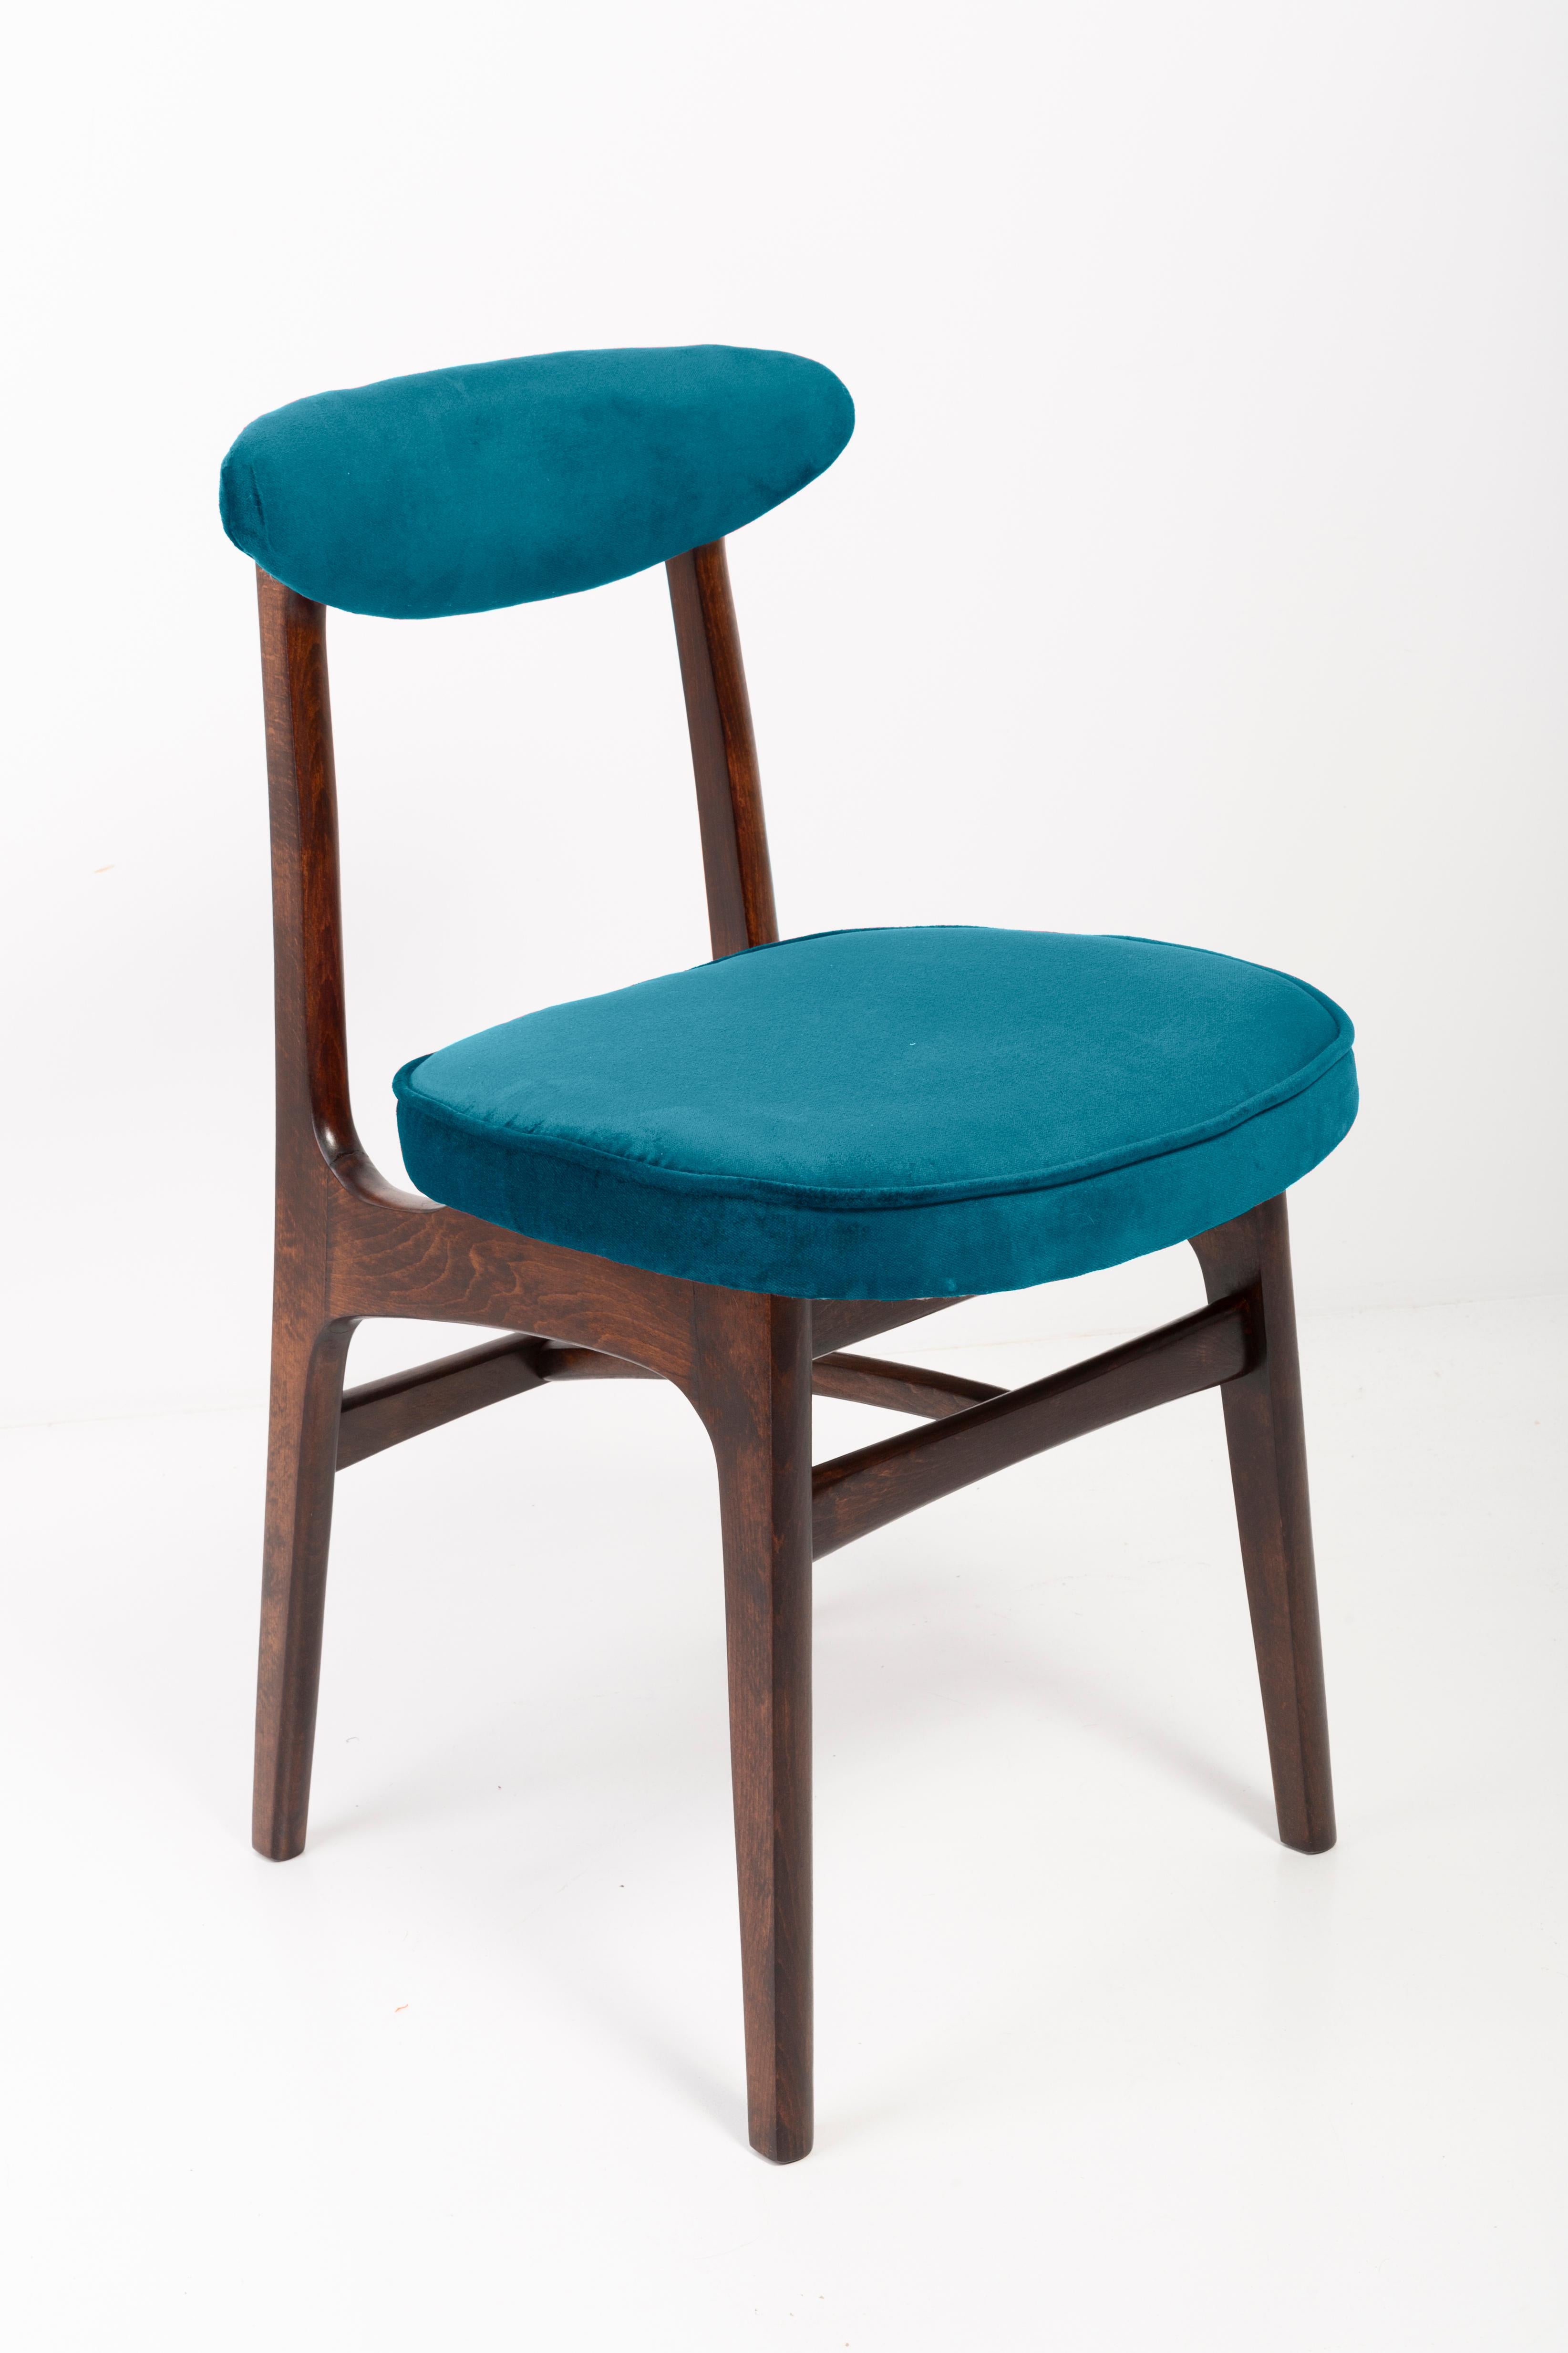 Eight chairs designed by Prof. Rajmund Halas. It has been made of beechwood. Chairs are after undergone a complete upholstery renovation, the woodwork has been refreshed. Seats and backs were dressed in a petrol blue (color 973), durable and